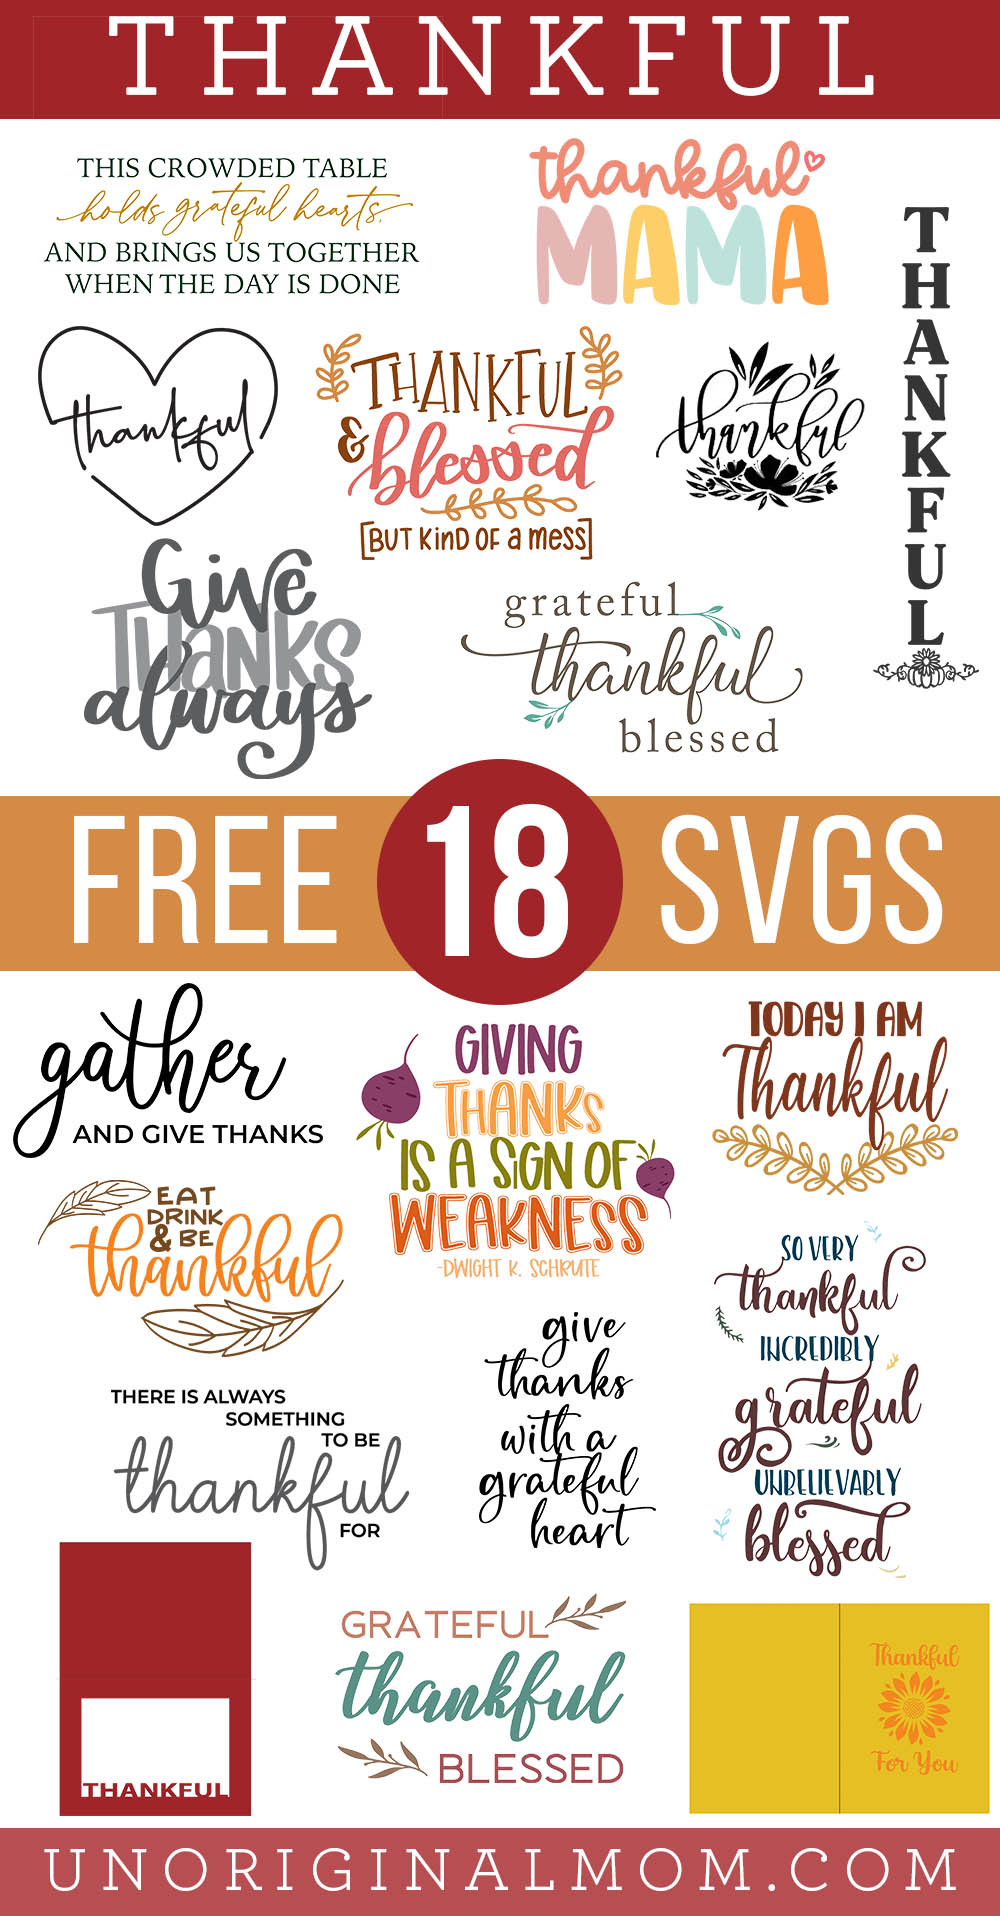 A collection of free thankful SVGs for Thanksgiving, including this "Thankful & Blessed but kind of a mess" SVG for Silhouette and Cricut